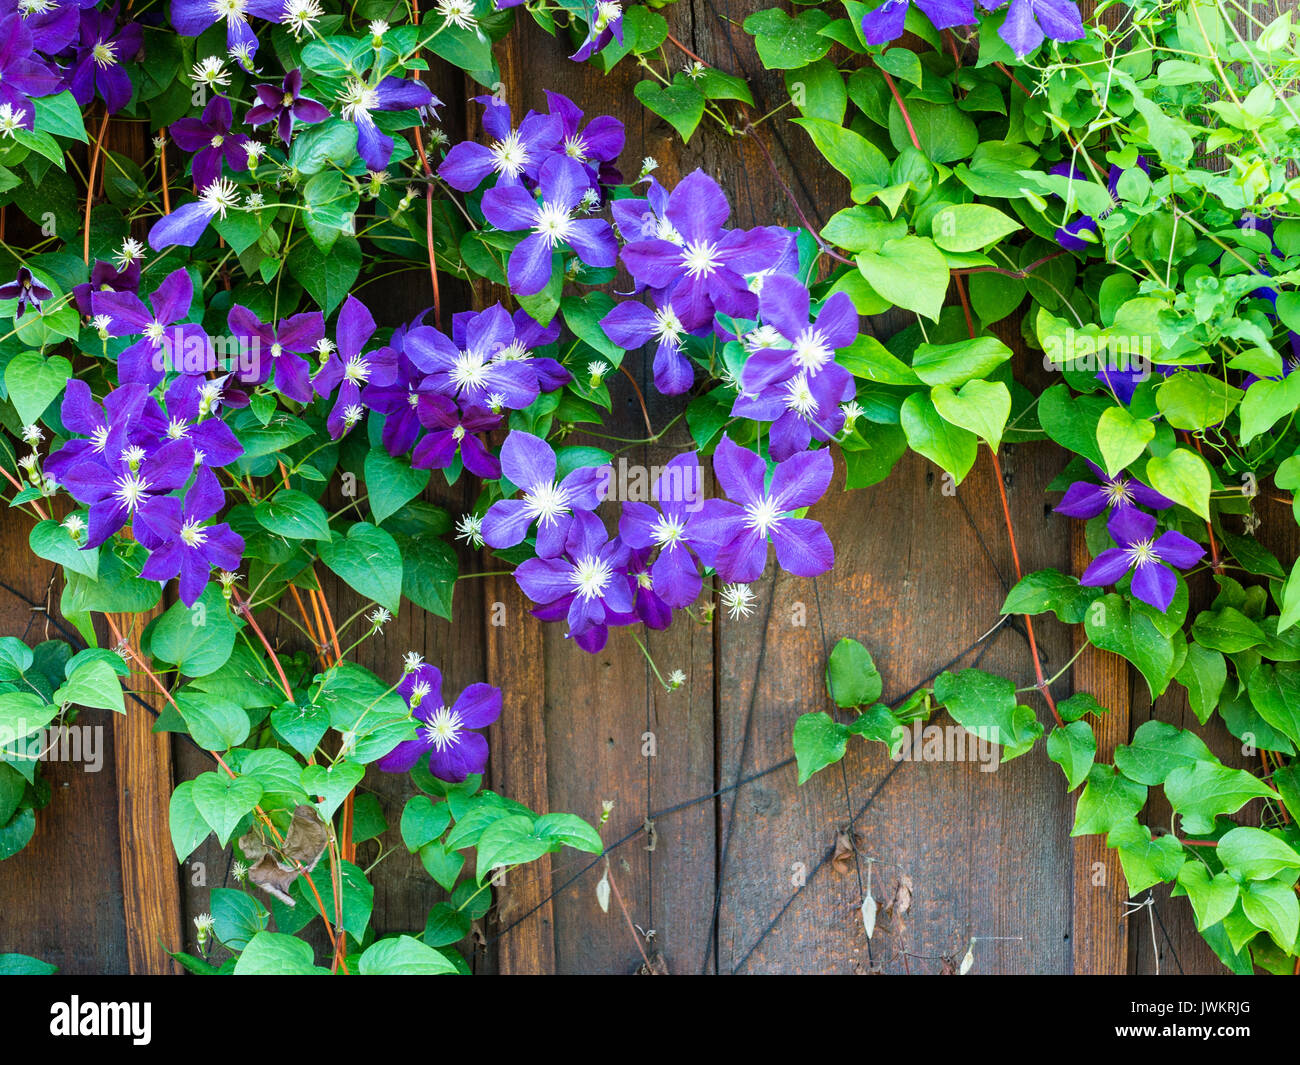 Purple flowers on a green vine on a wooden garden fence Stock Photo